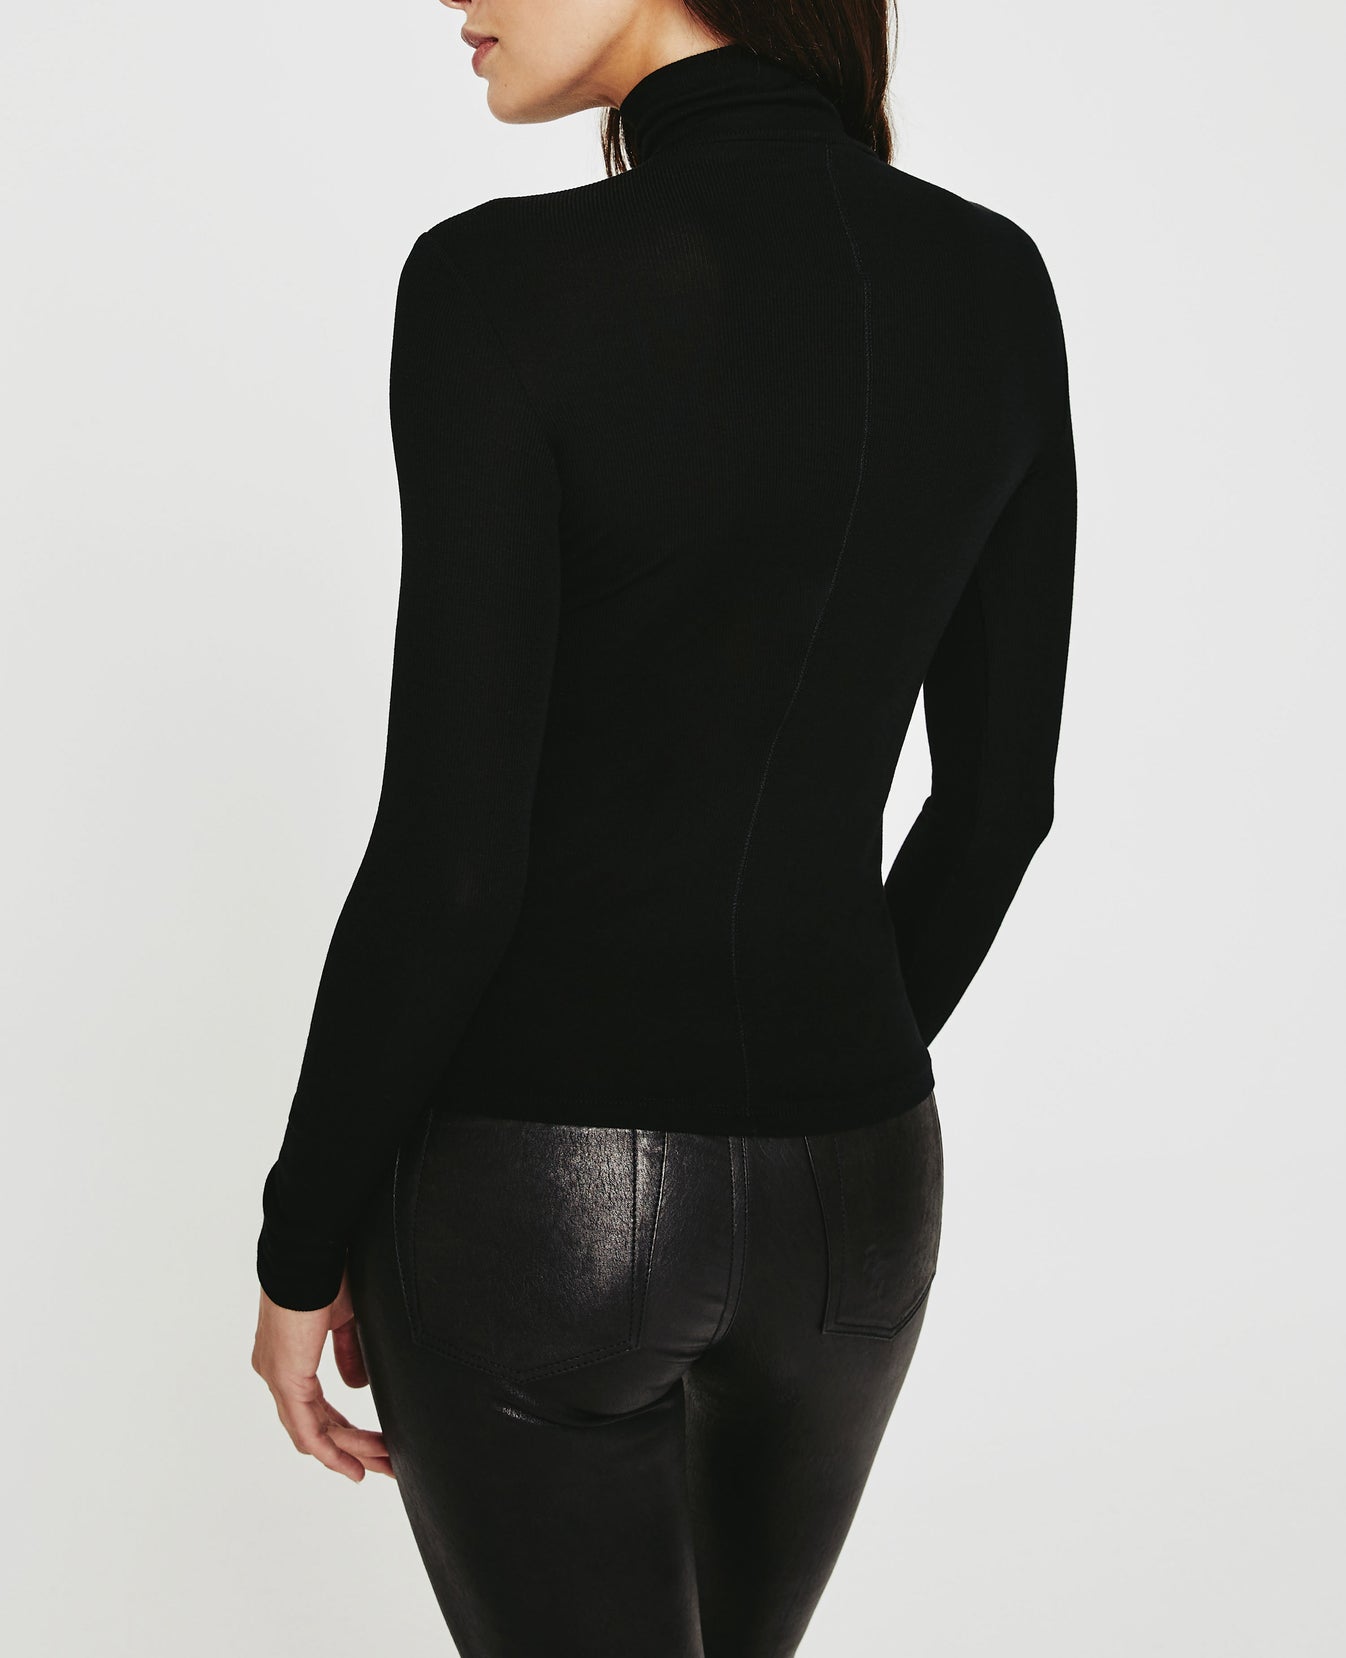 Edie Long Sleeve Turtleneck True Black Ribbed Knit Collection Women Tops Photo 6